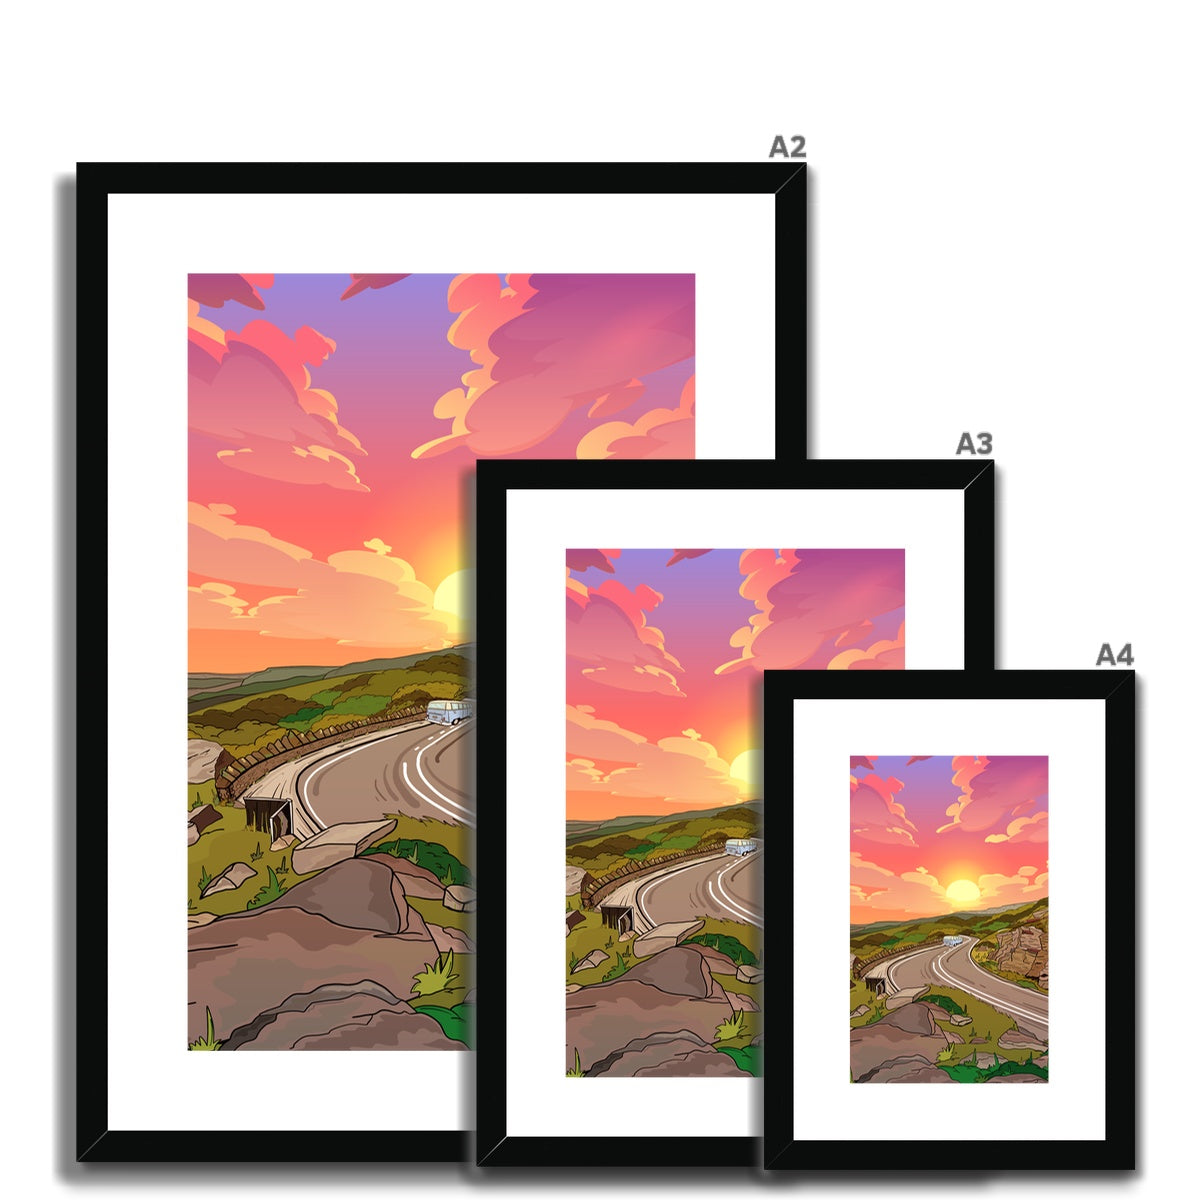 Surprise View - Into the sunset Framed & Mounted Print